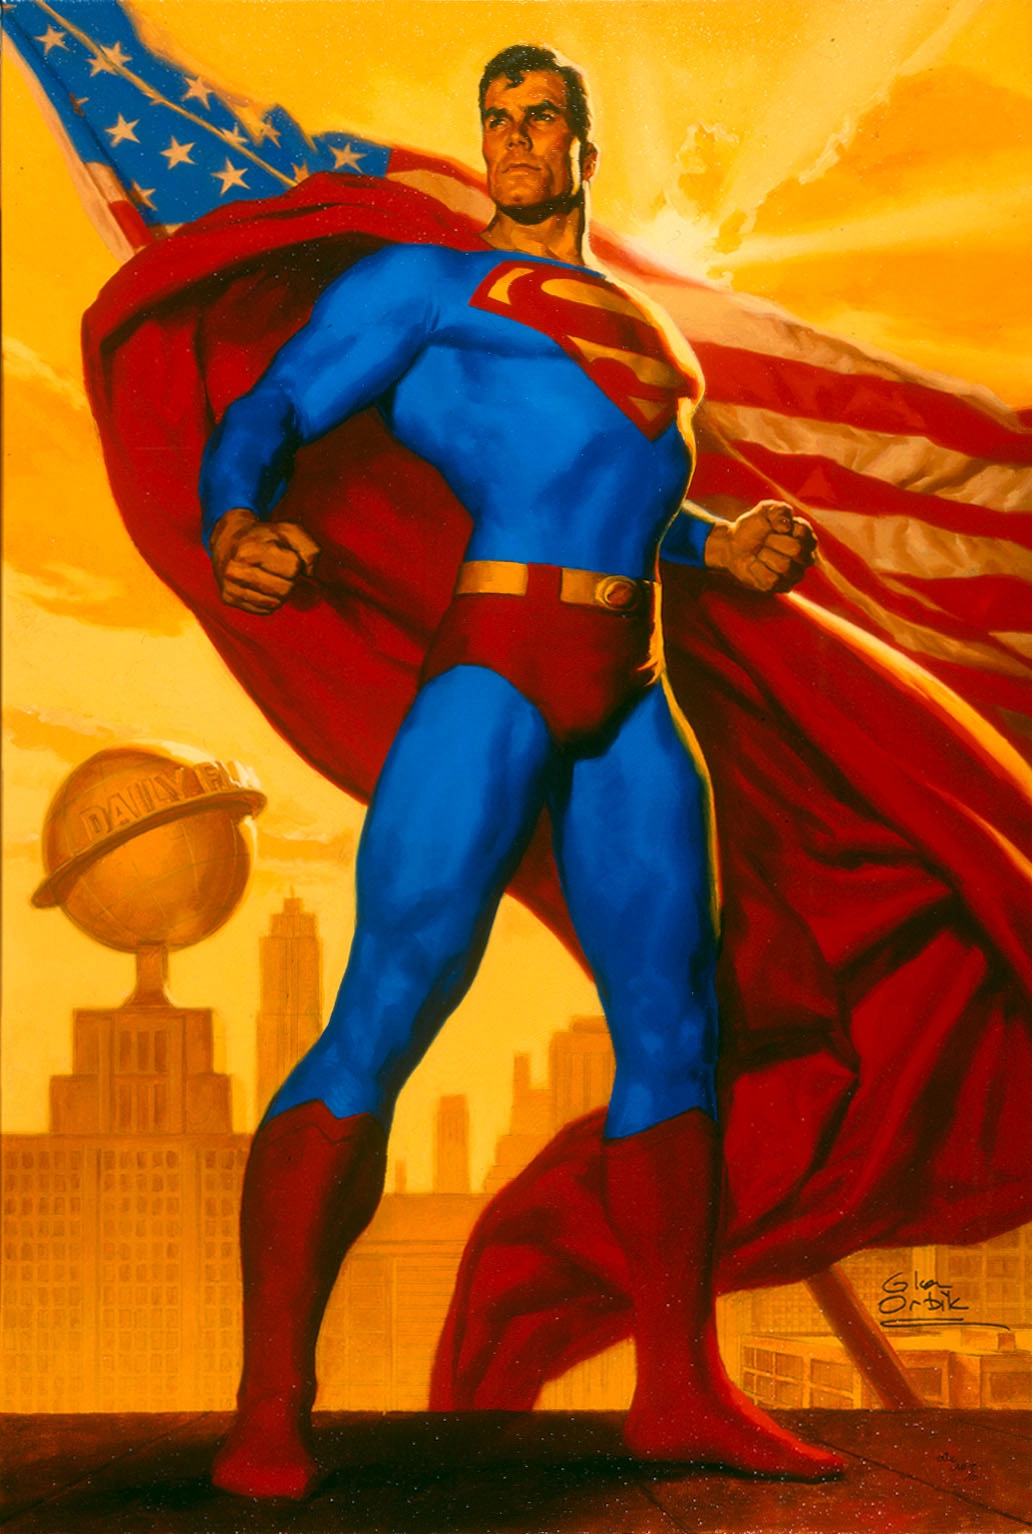 Glen Orbik Truth, Justice And The American Way Giclee On Paper